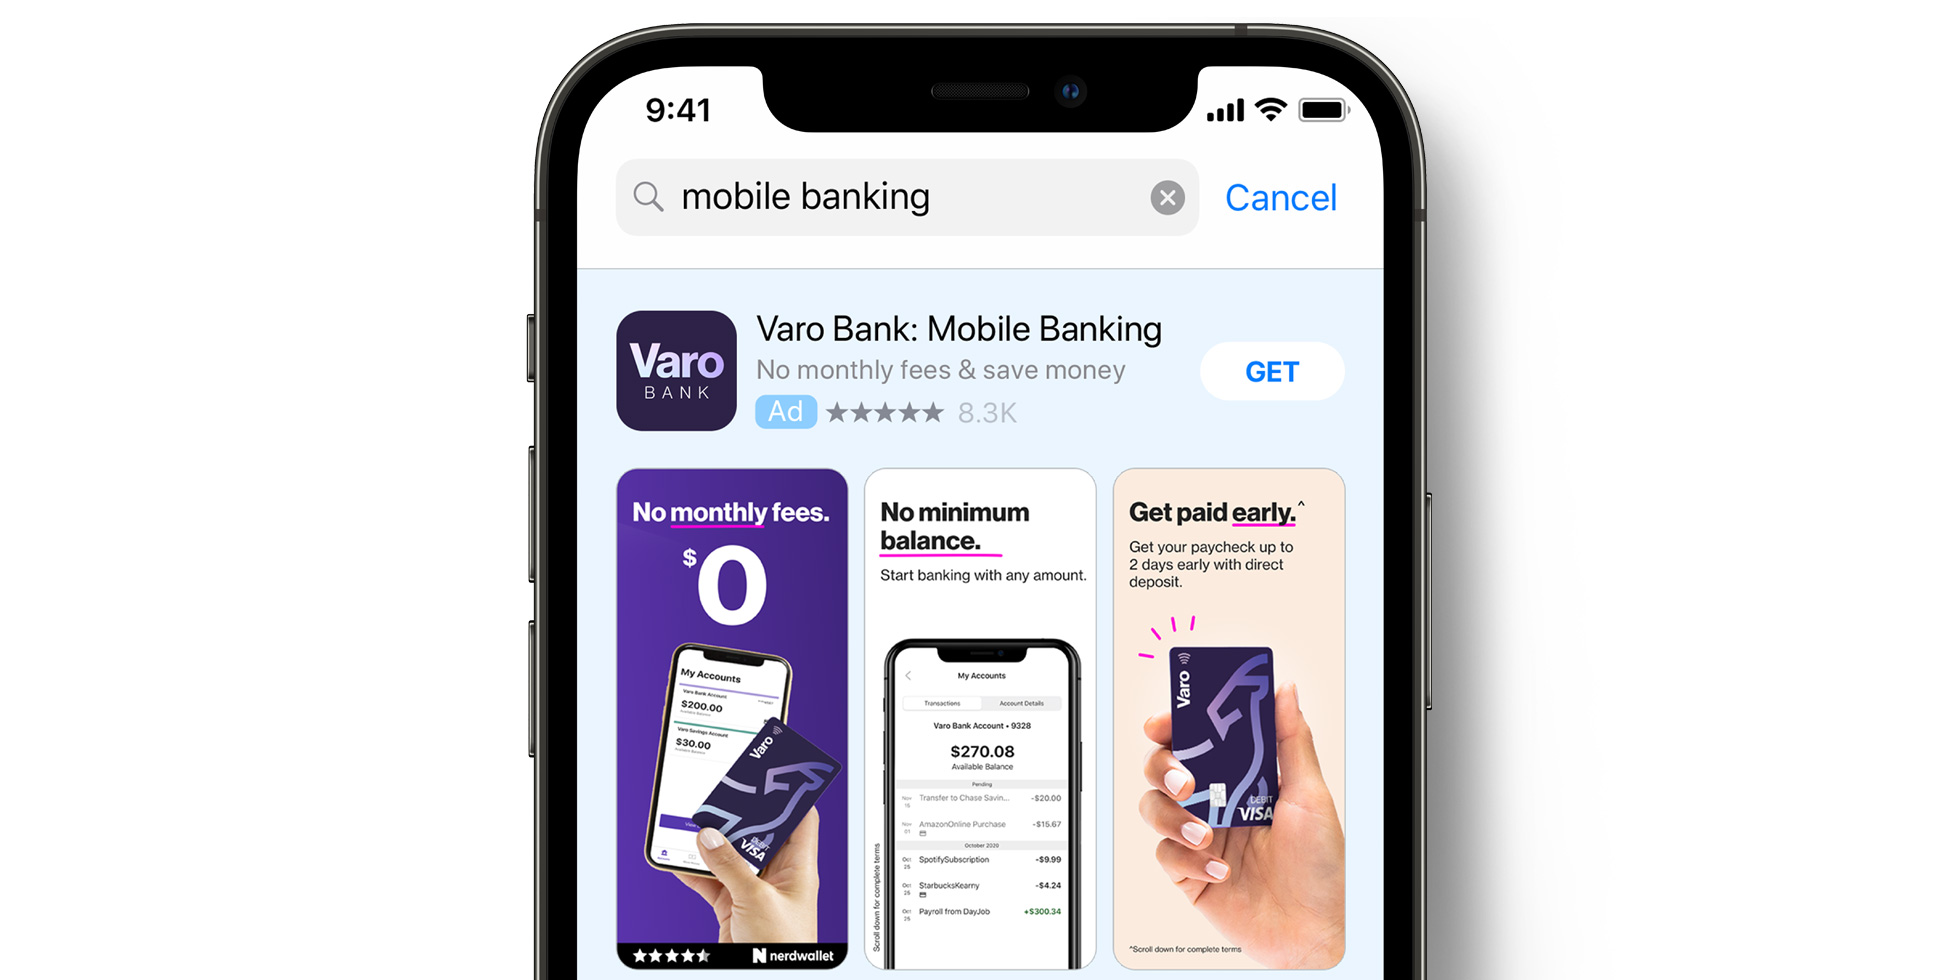 Varo Bank ad on the App Store 